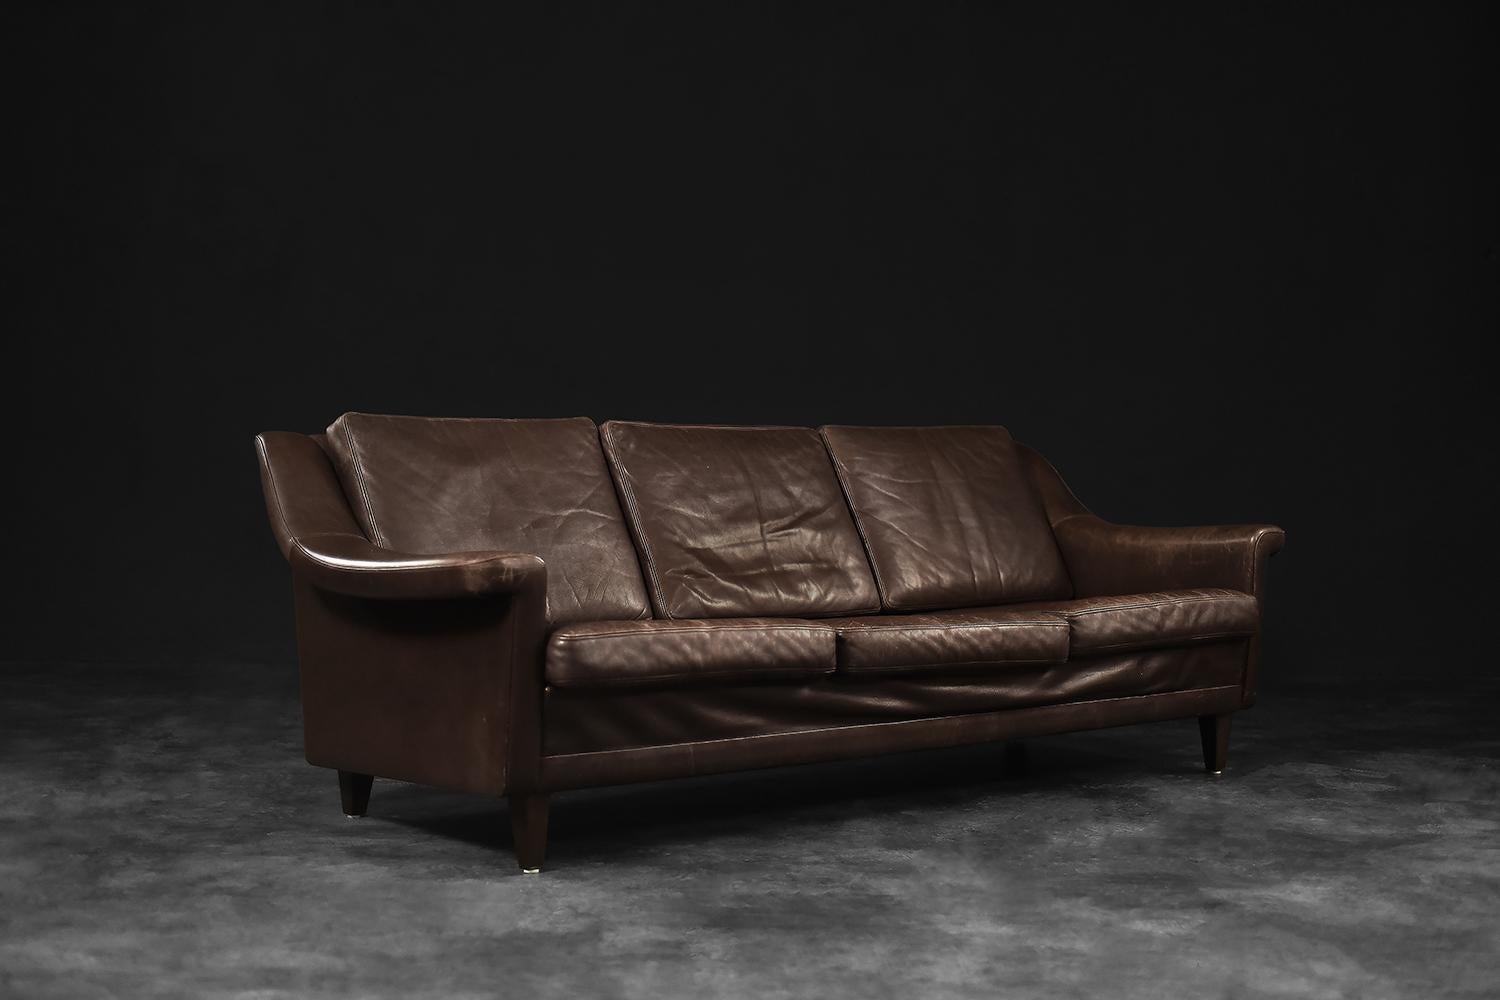 This wide three-seater sofa was made in Denmark in the 1970s. The modernist frame with six pillows is upholstered in chestnut colored natural leather. The sofa has subtly rounded edges and armrests. The wide and comfortable seat makes the comfort of